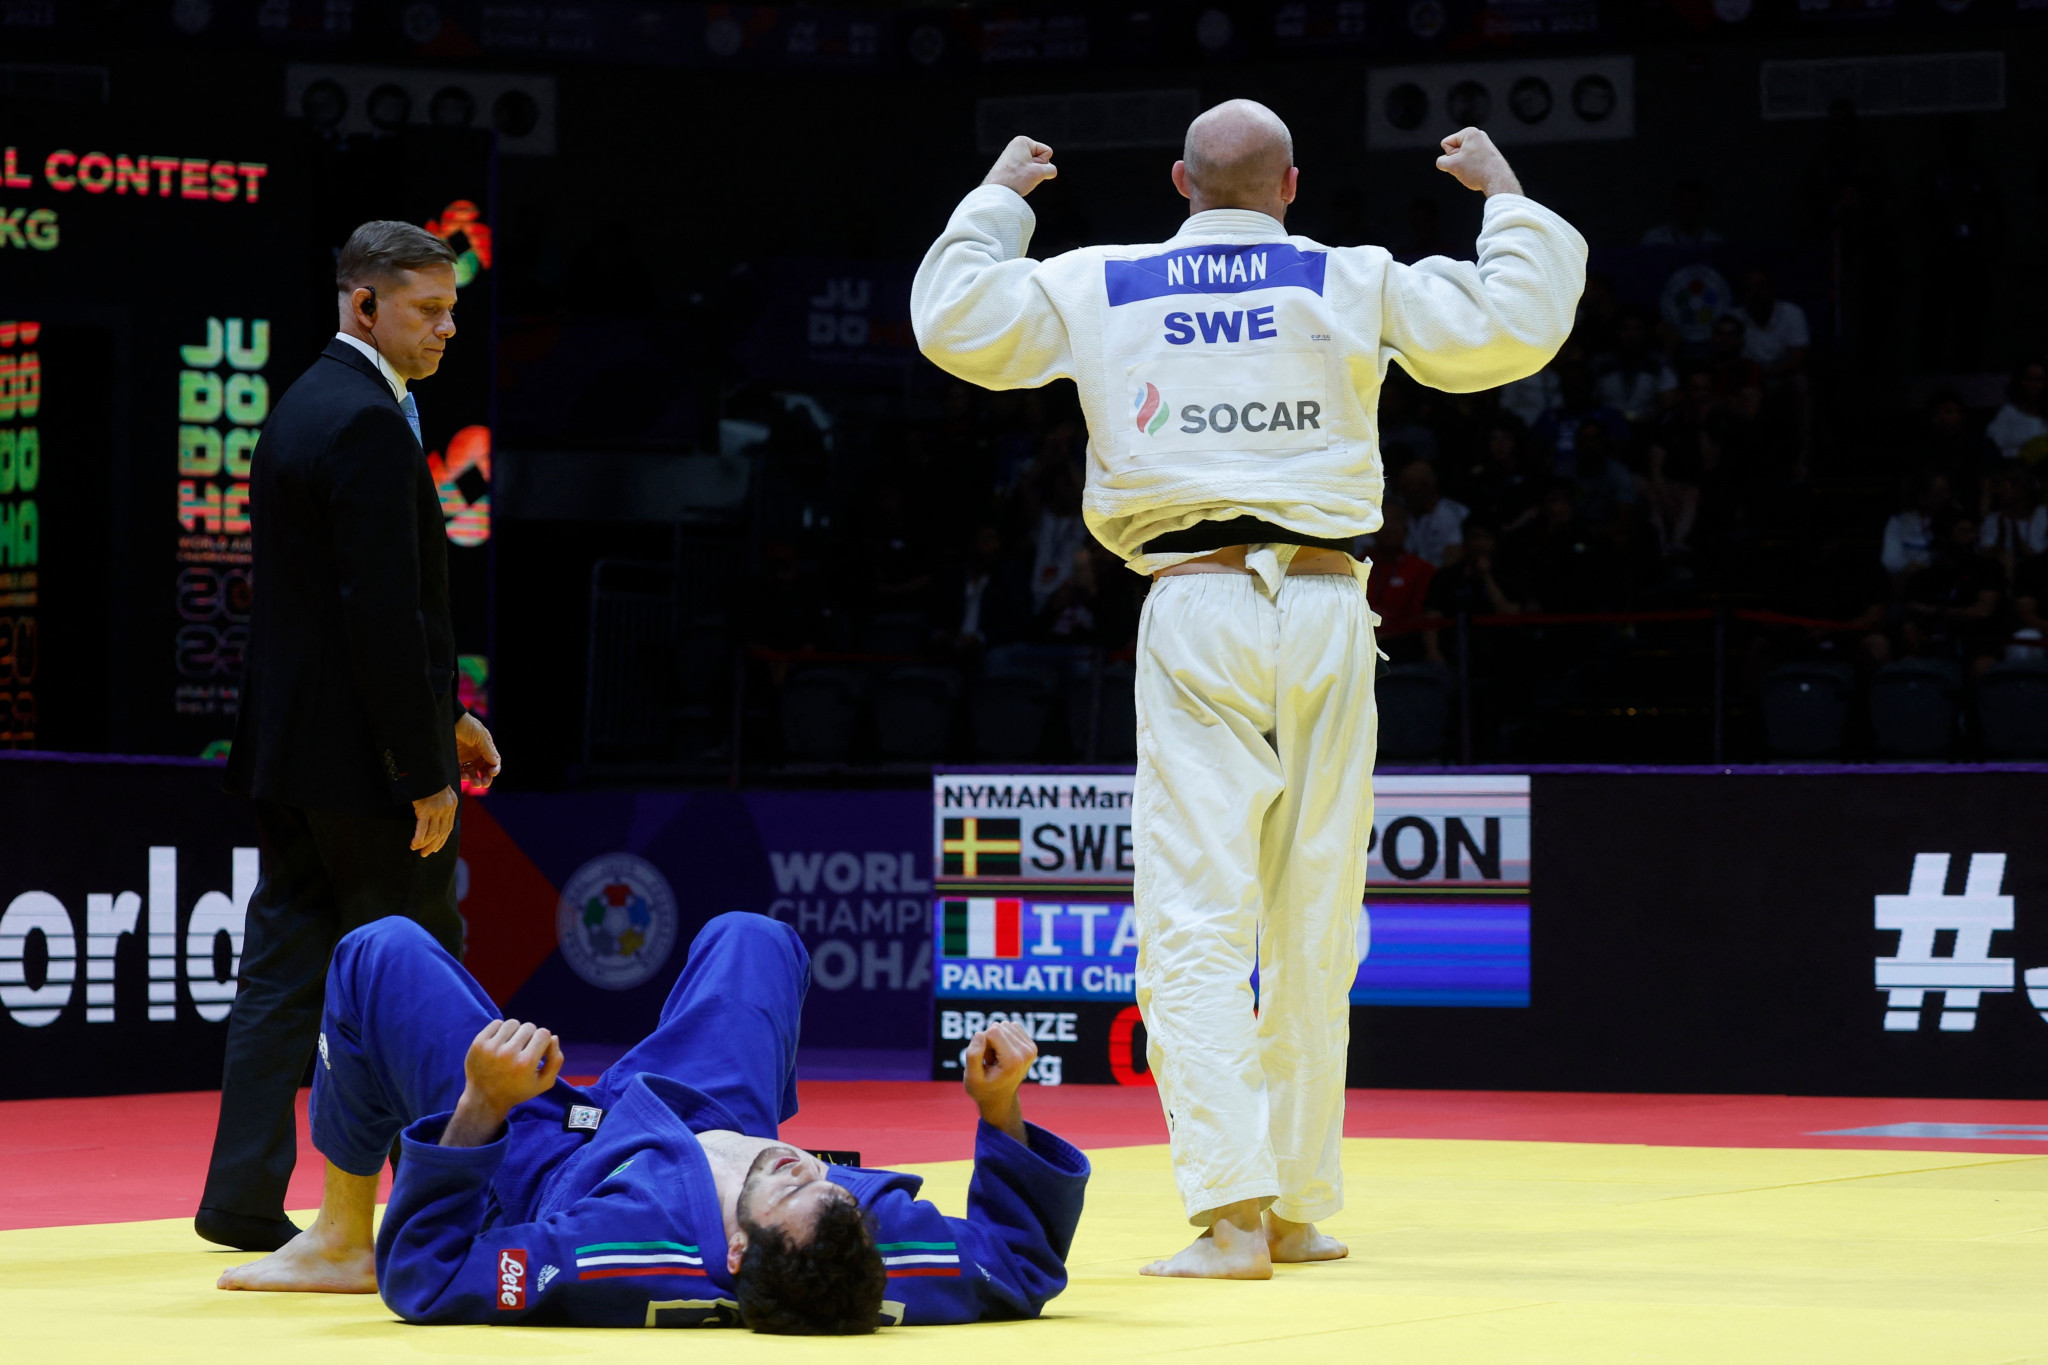 Sweden’s Marcus Nyman, right, achieved two waza-aris against the run of play to beat Christian Parlati in the bronze-medal match ©Getty Images